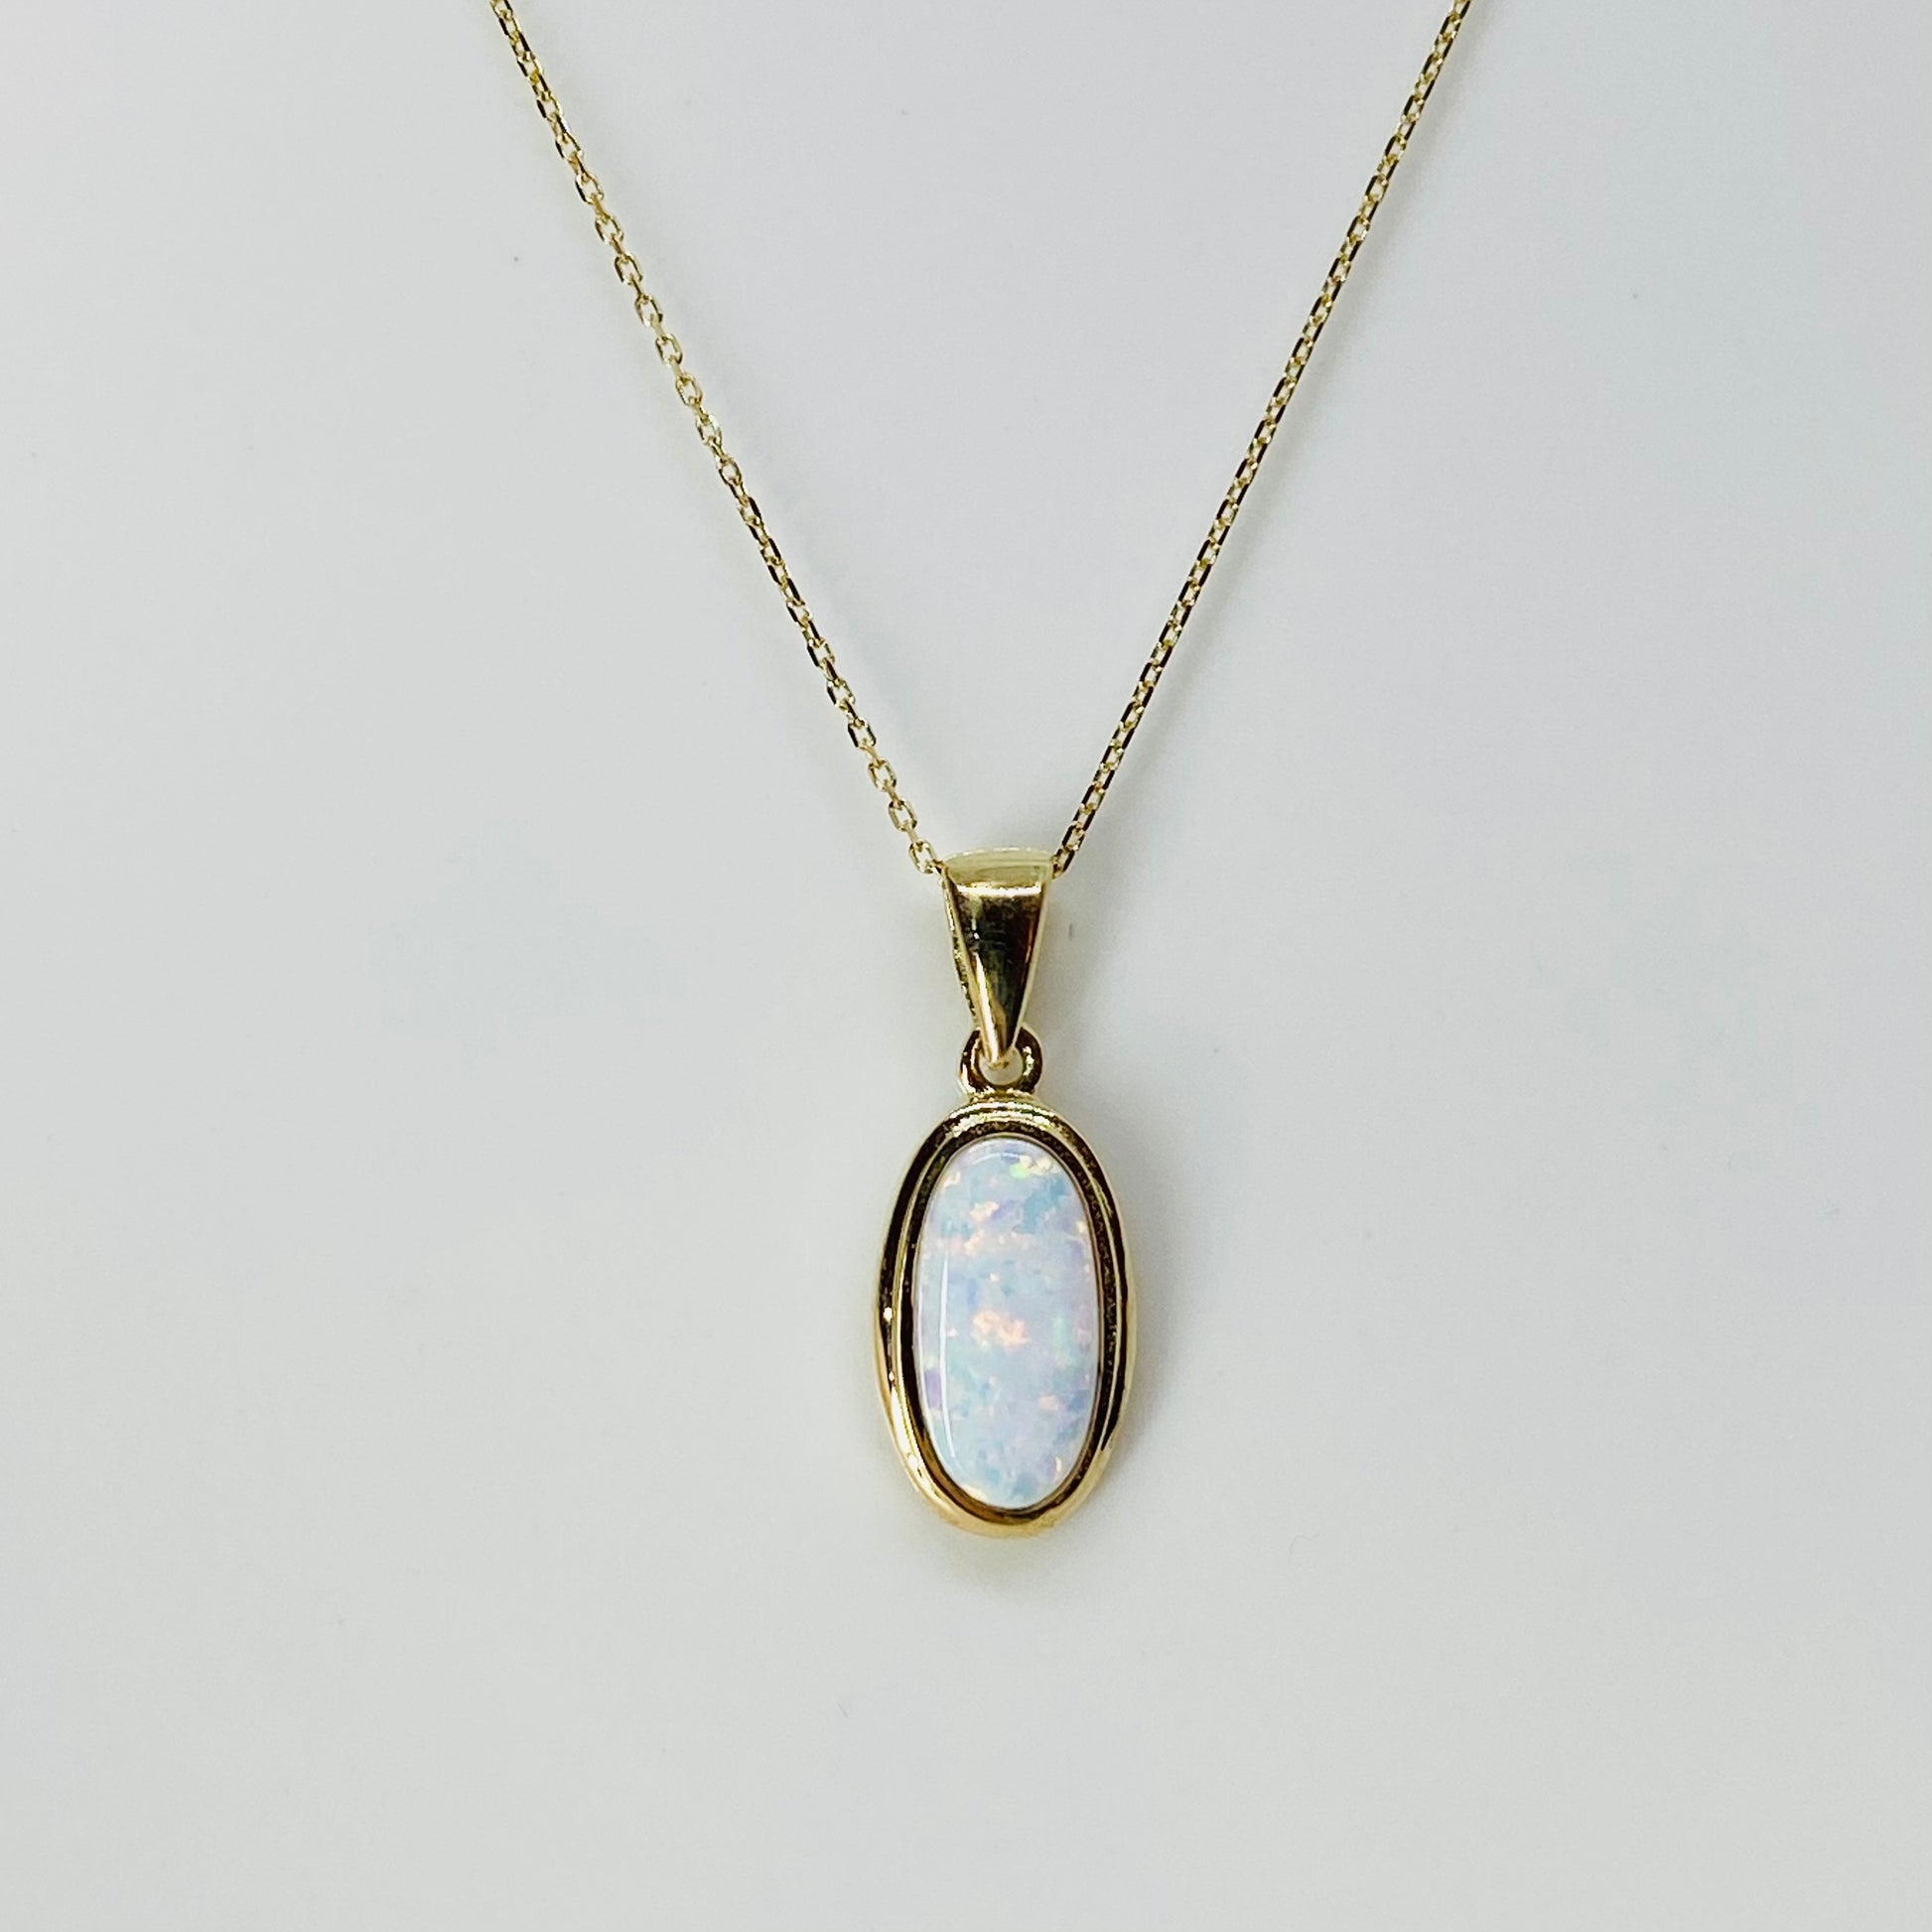 9ct Gold Oval Opalique Pendant Necklace - John Ross Jewellers